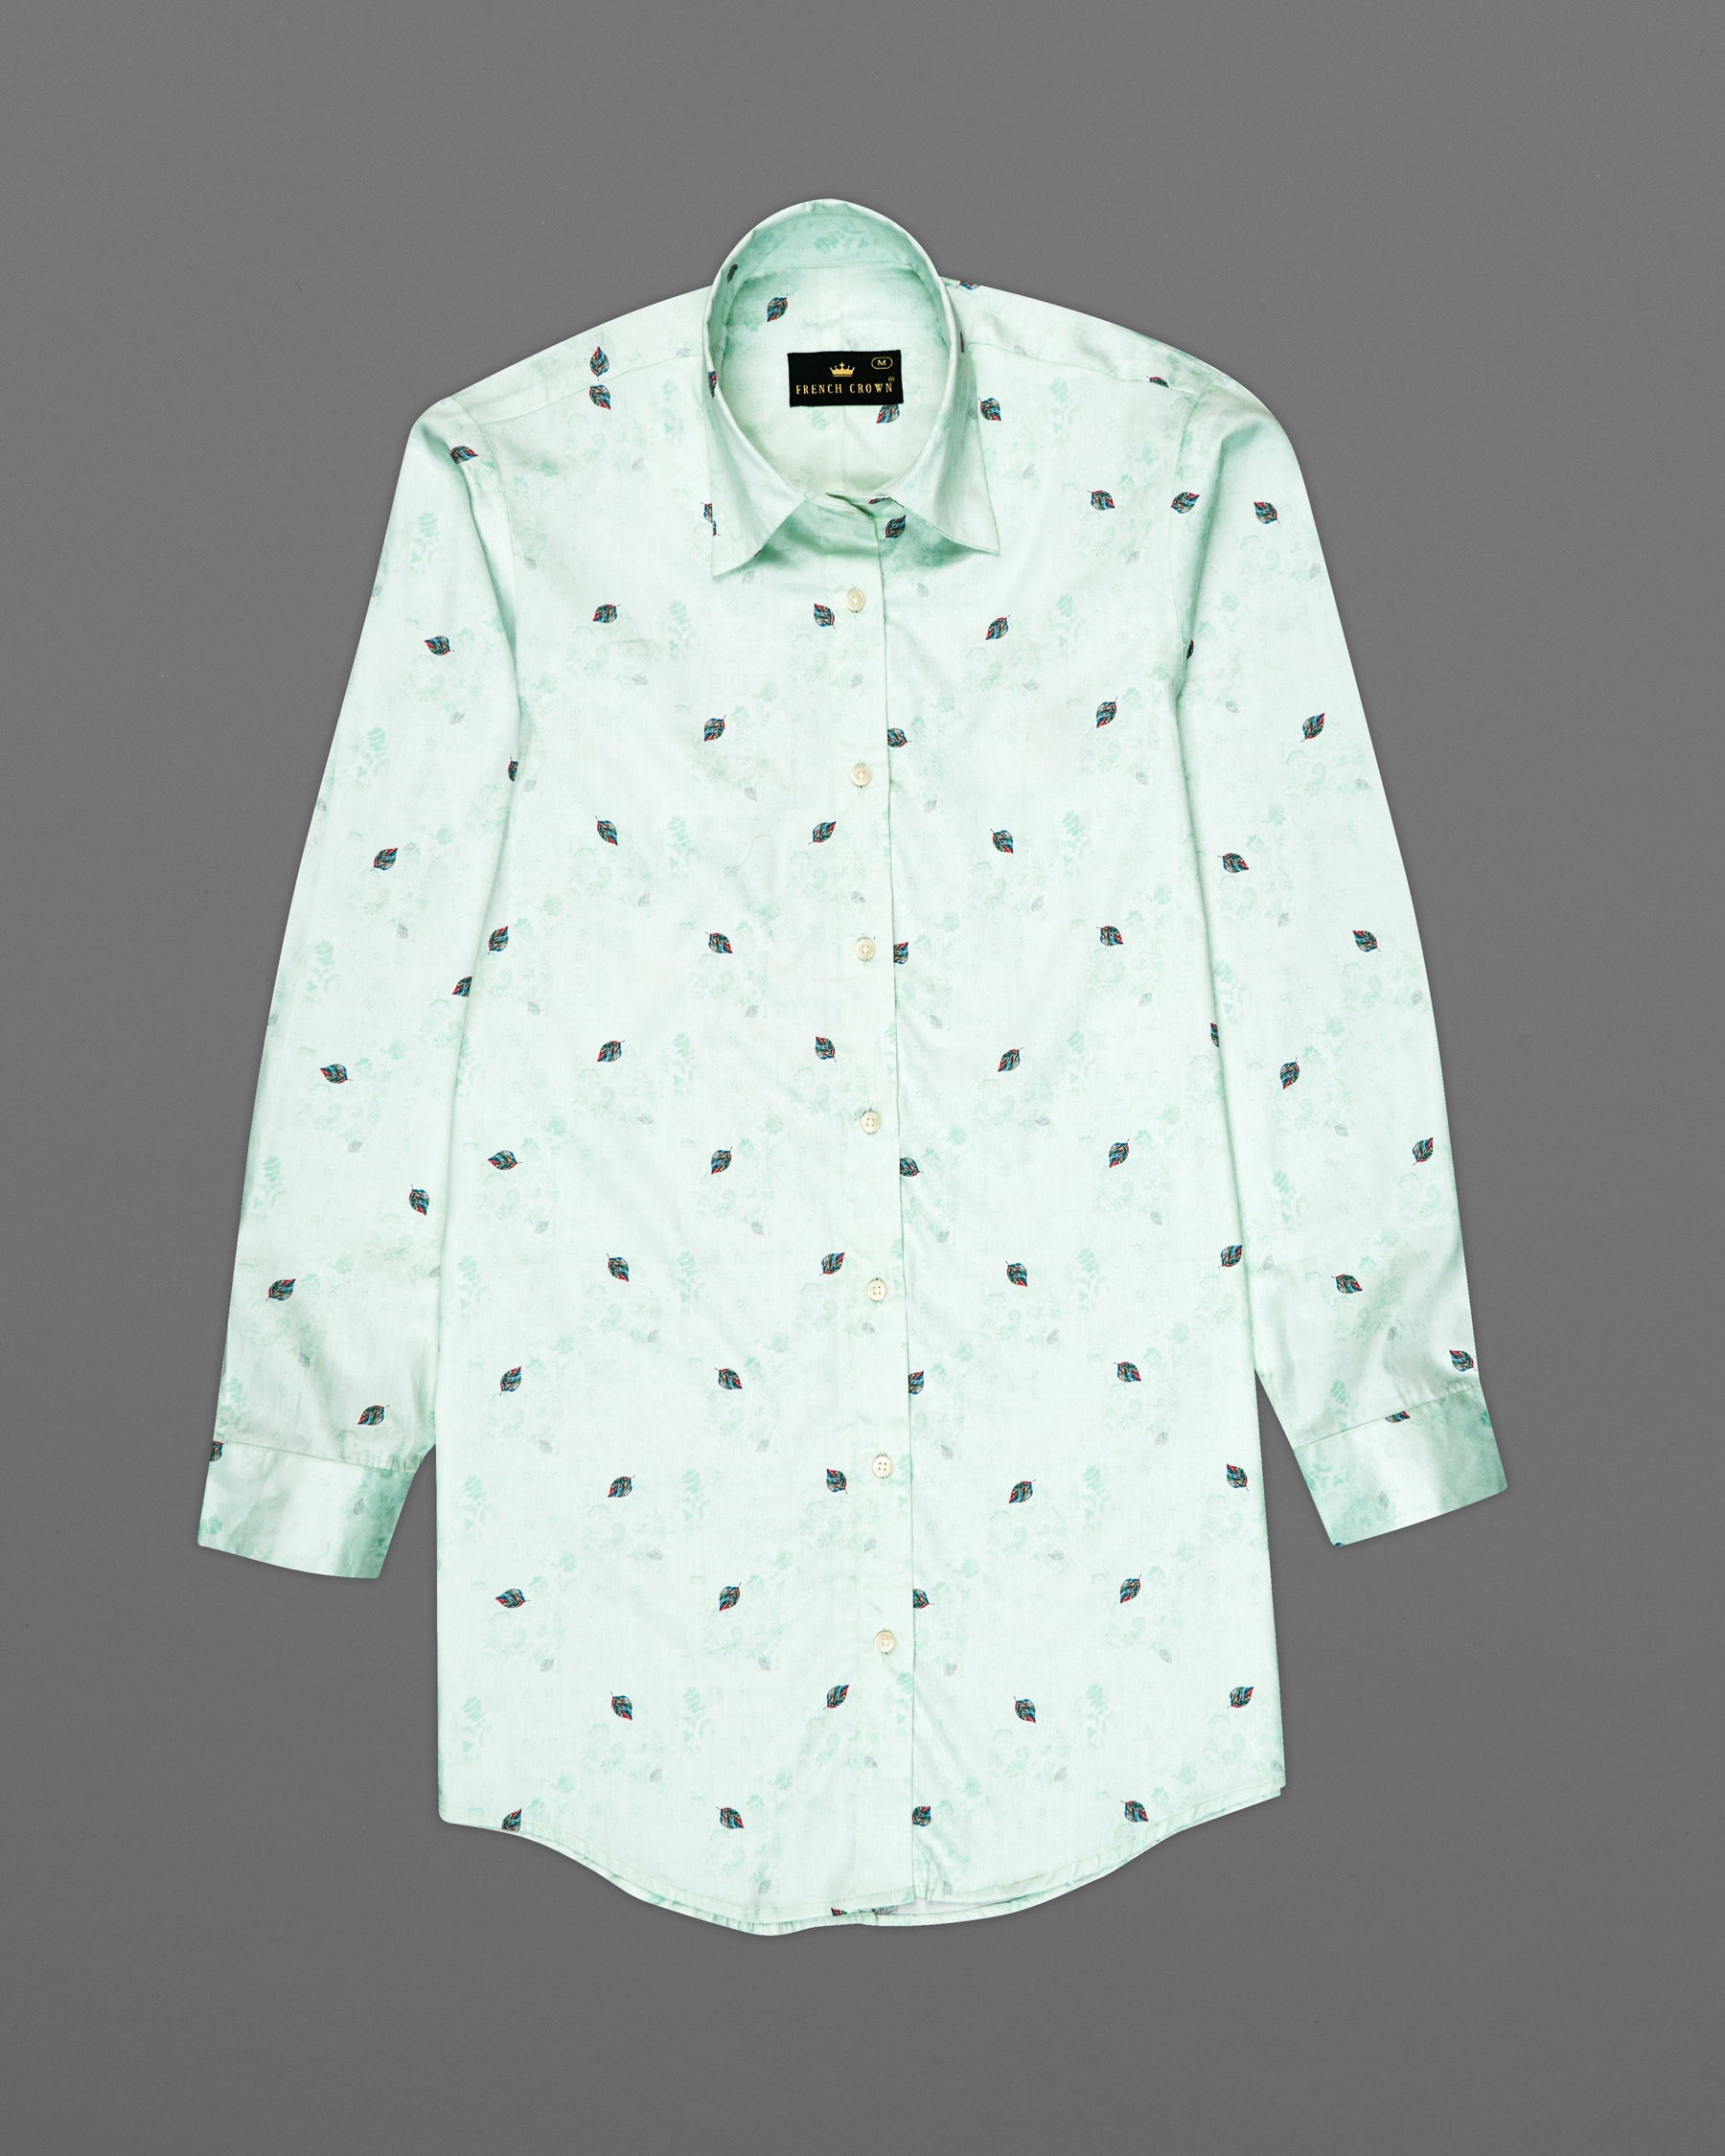 Periglacial Green with Feather Printed Super Soft Premium Cotton Women’s Shirt WS060-32, WS060-34, WS060-36, WS060-38, WS060-40, WS060-42